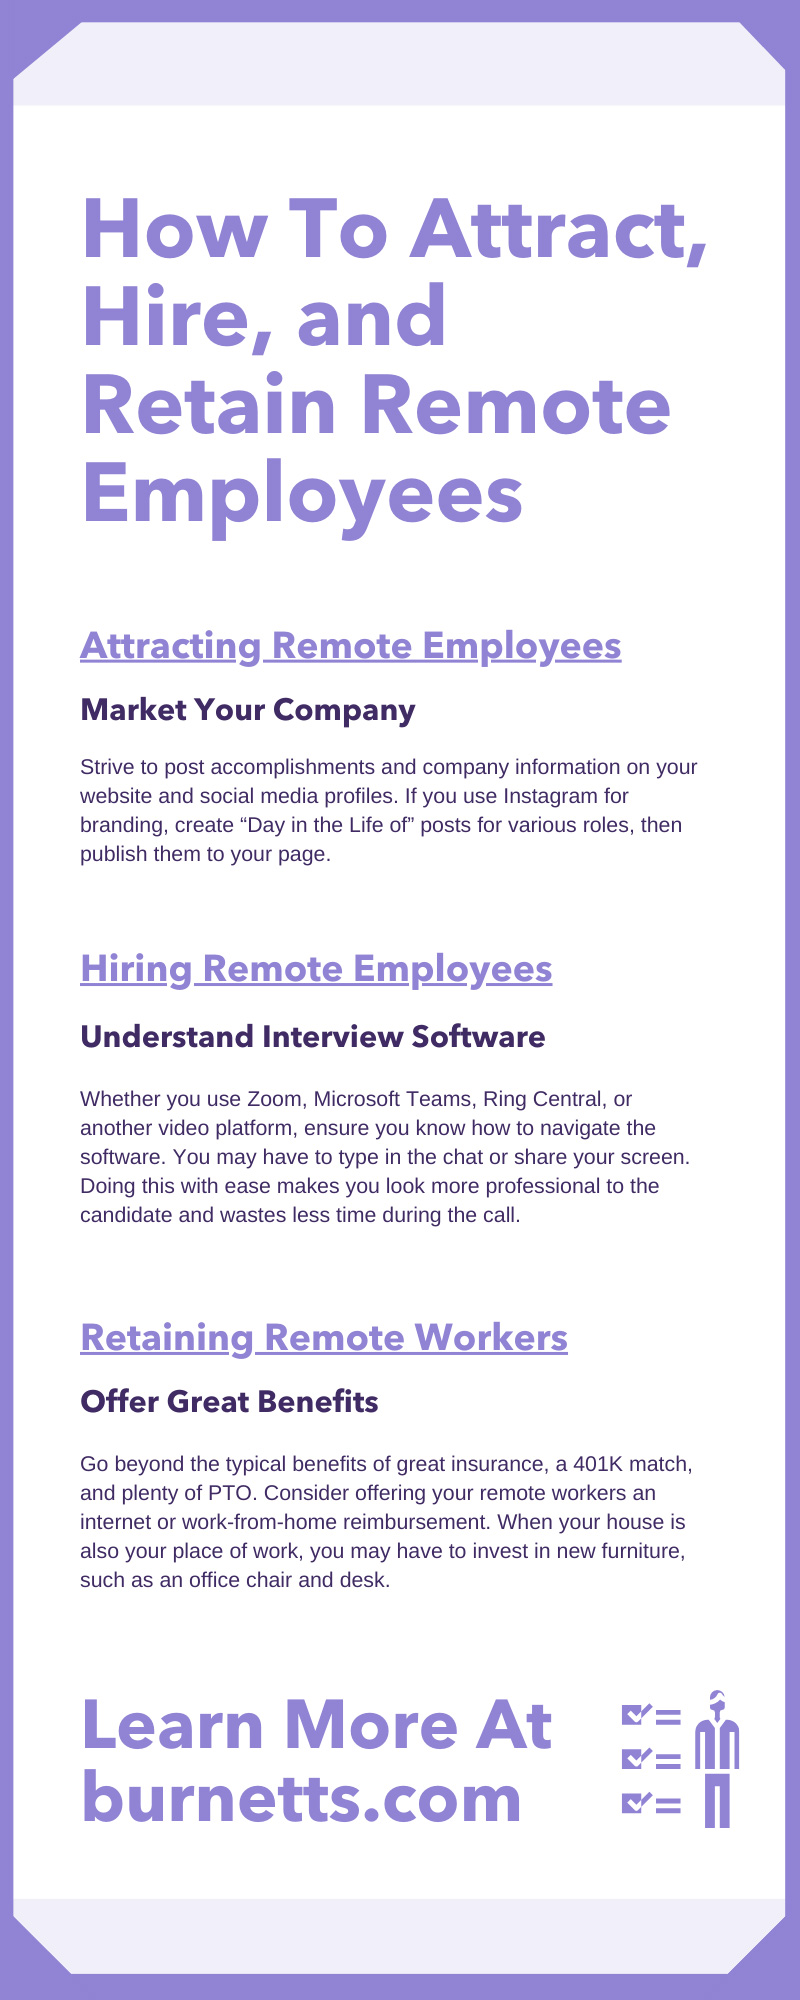 How To Attract, Hire, and Retain Remote Employees